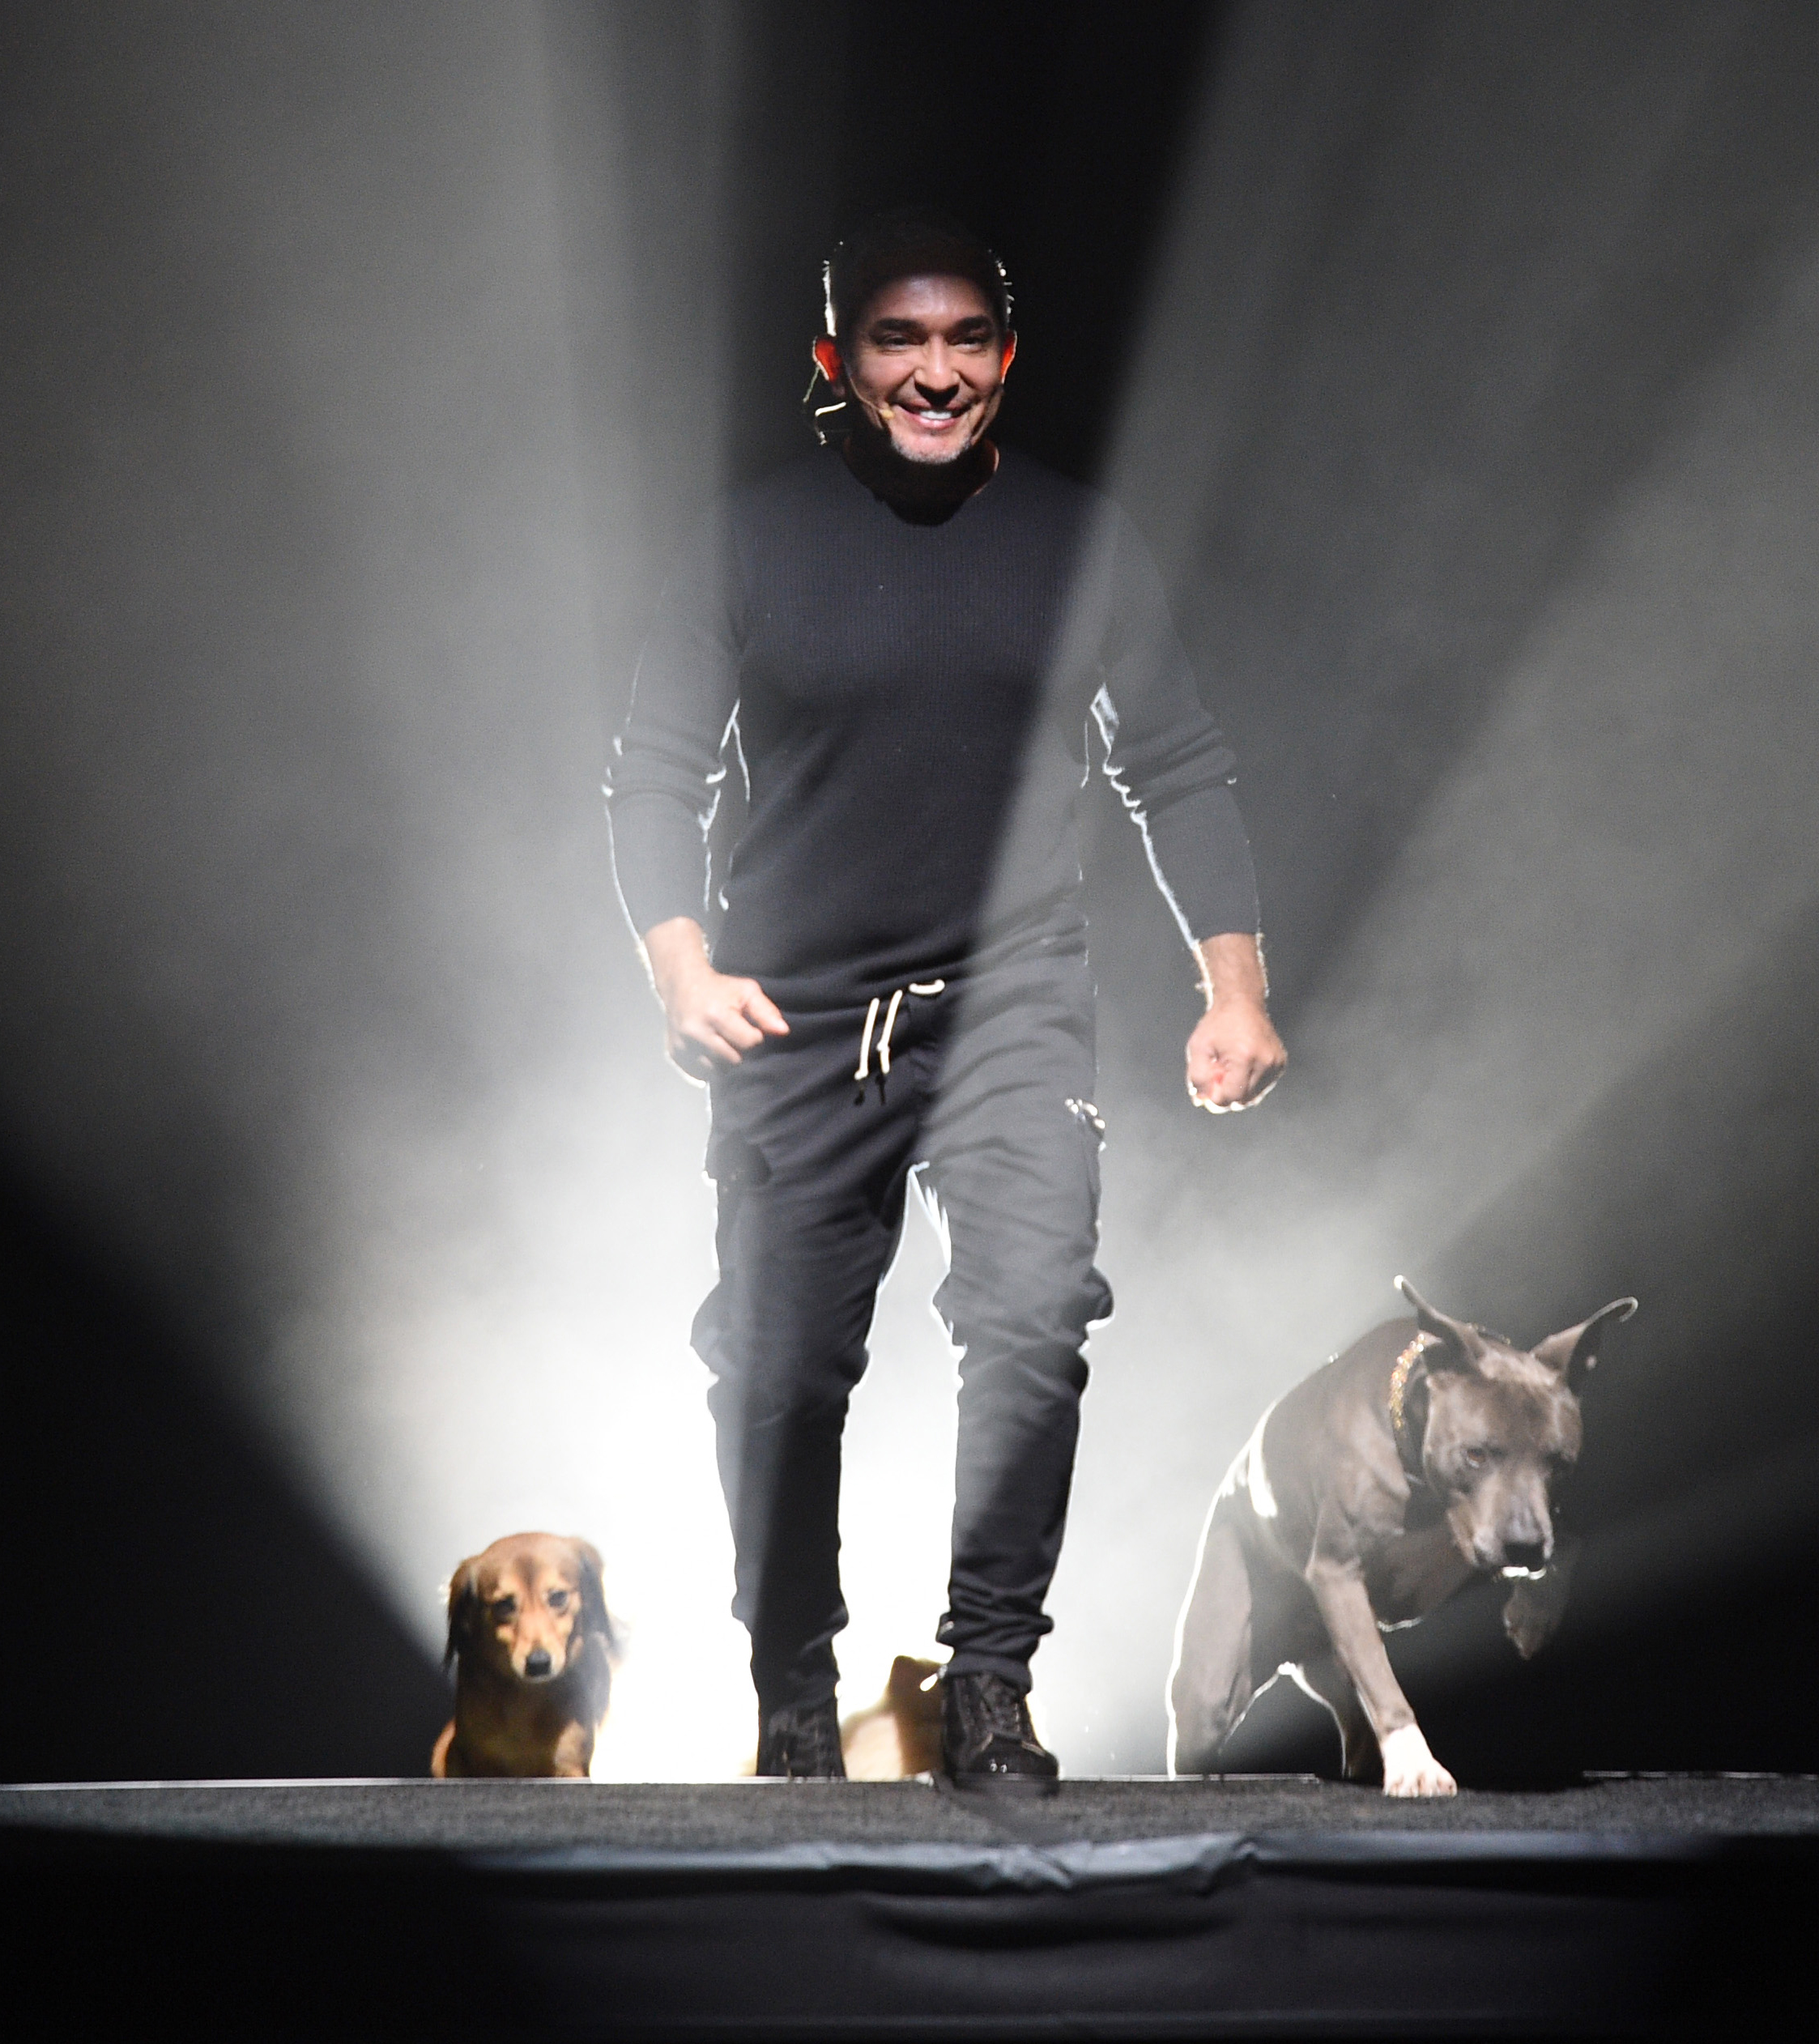 A man smiling on stage with two dogs under spotlights.